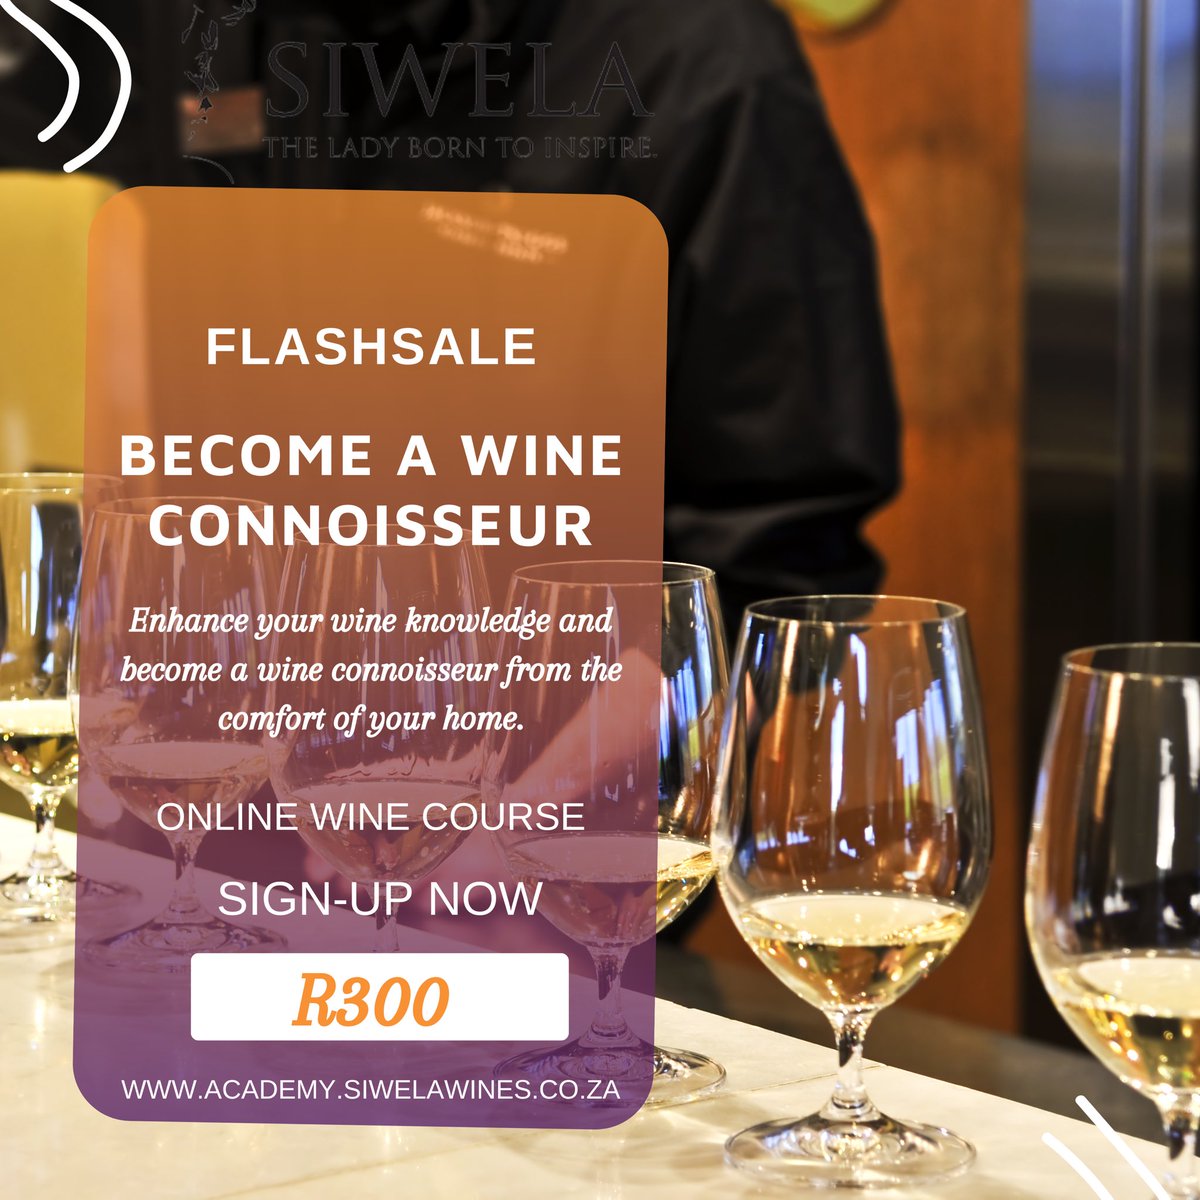 LIMITED-TIME OFFER! Don’t miss out on our exclusive ‘Become a Wine Connoisseur’ course, now available at a discounted price. This deal won’t last long, so secure your spot today and start your journey towards becoming a true wine connoisseur.